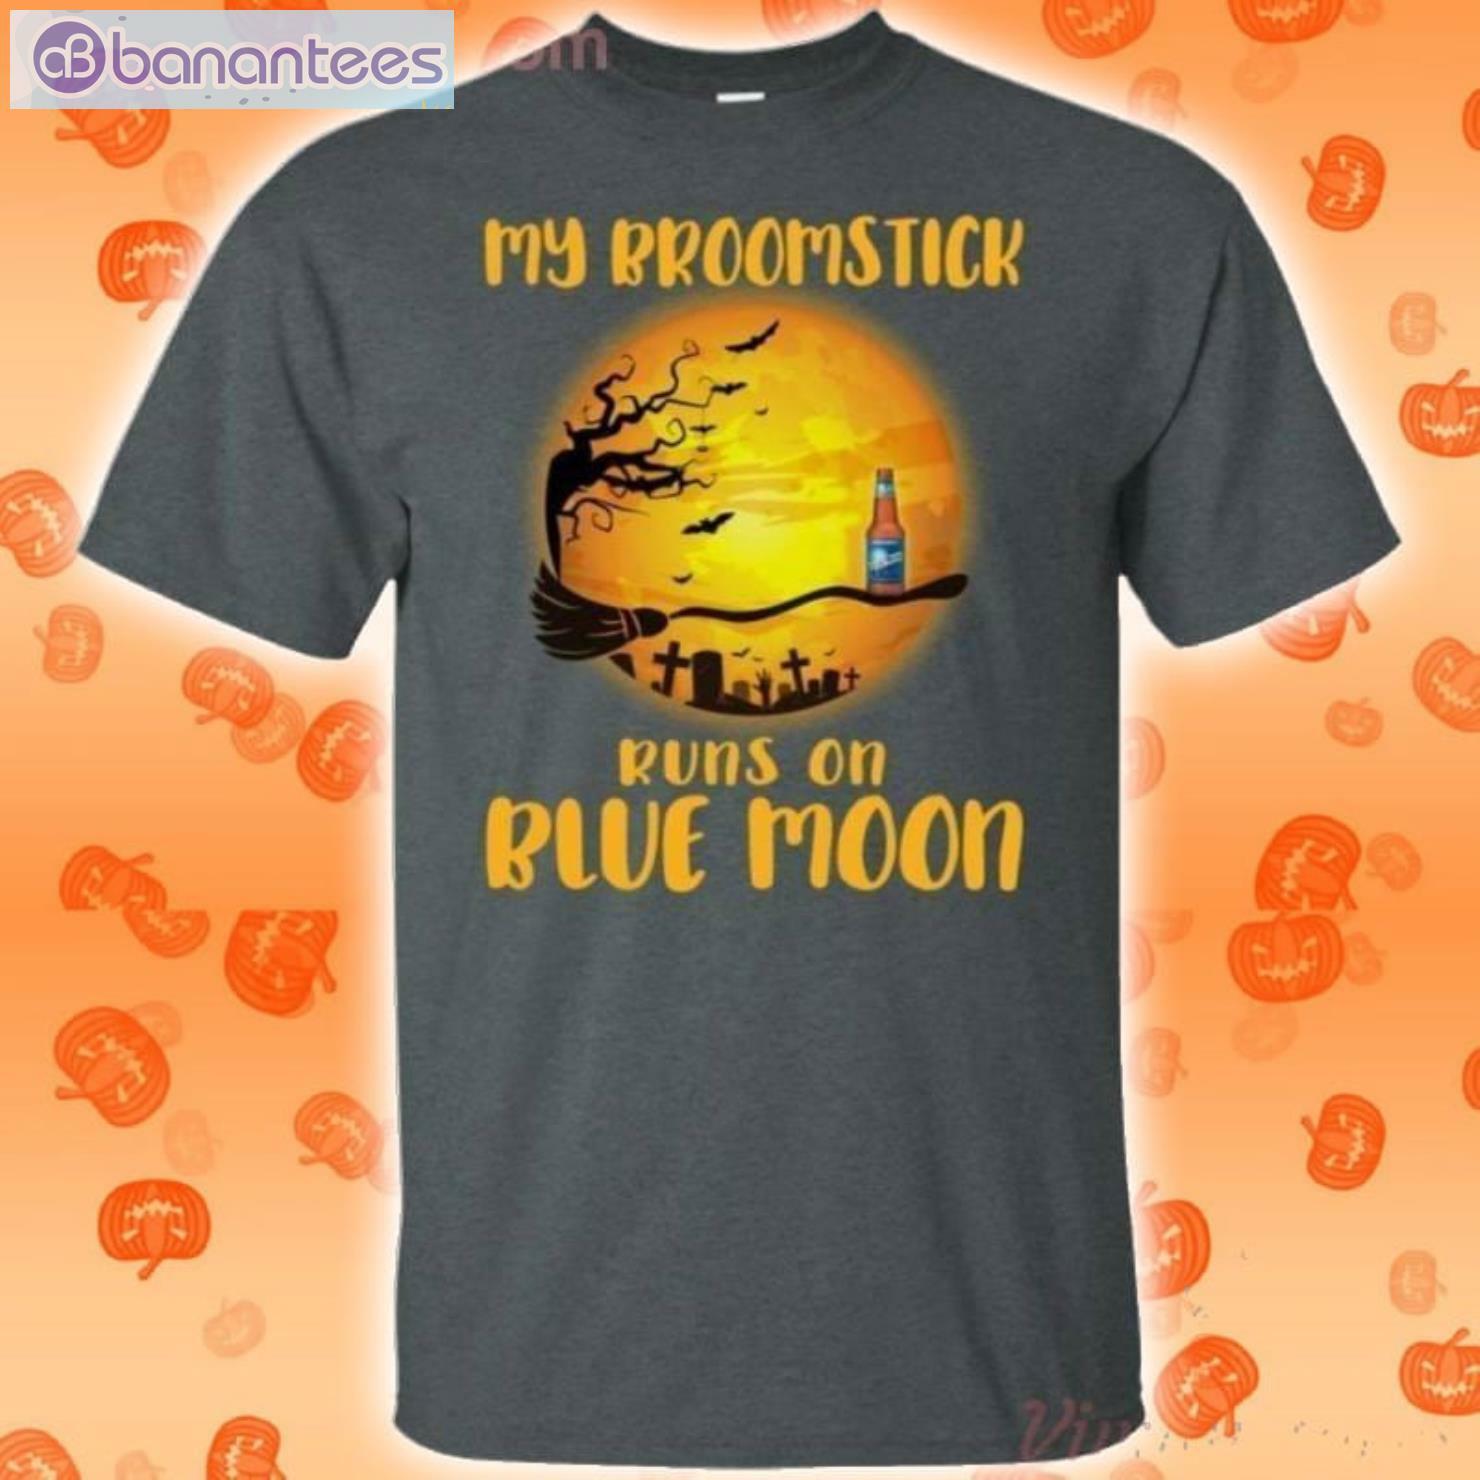 My Broomstick Runs On Blue Moon Funny Beer Halloween T-Shirt Product Photo 2 Product photo 2